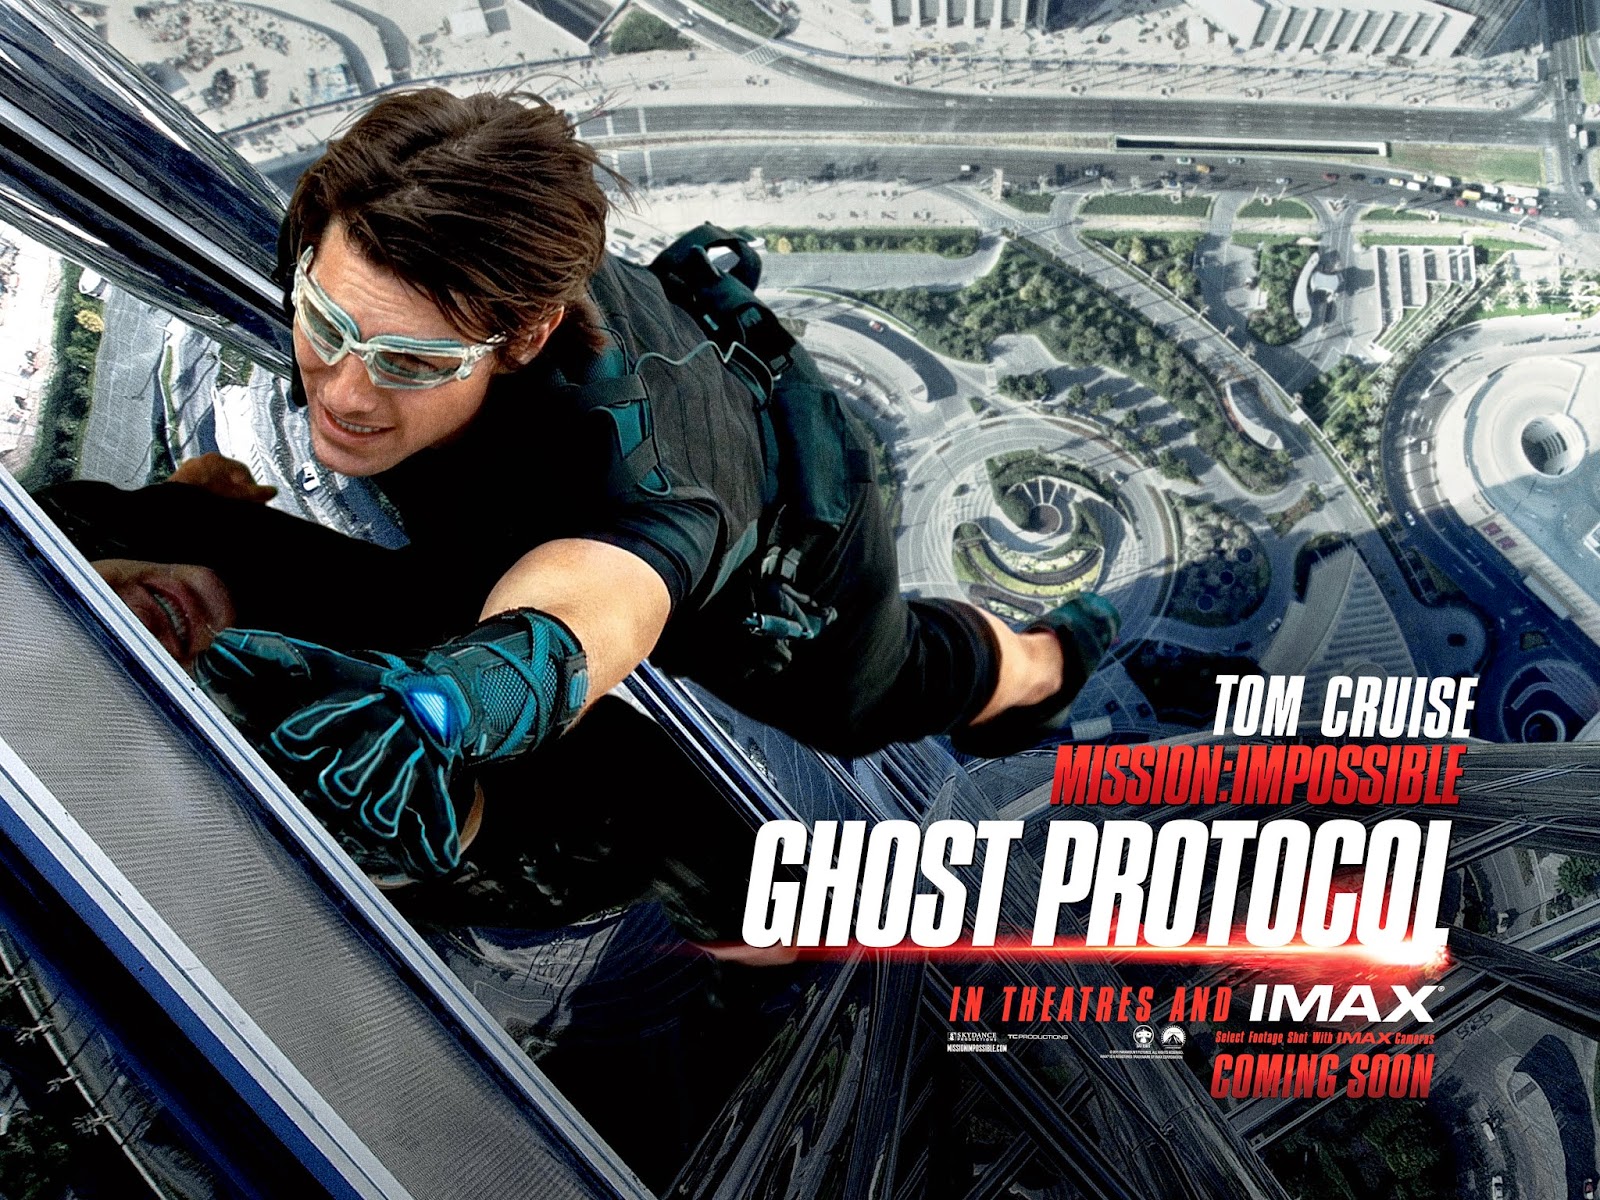 mission impossible ghost protocol in hindi hd download